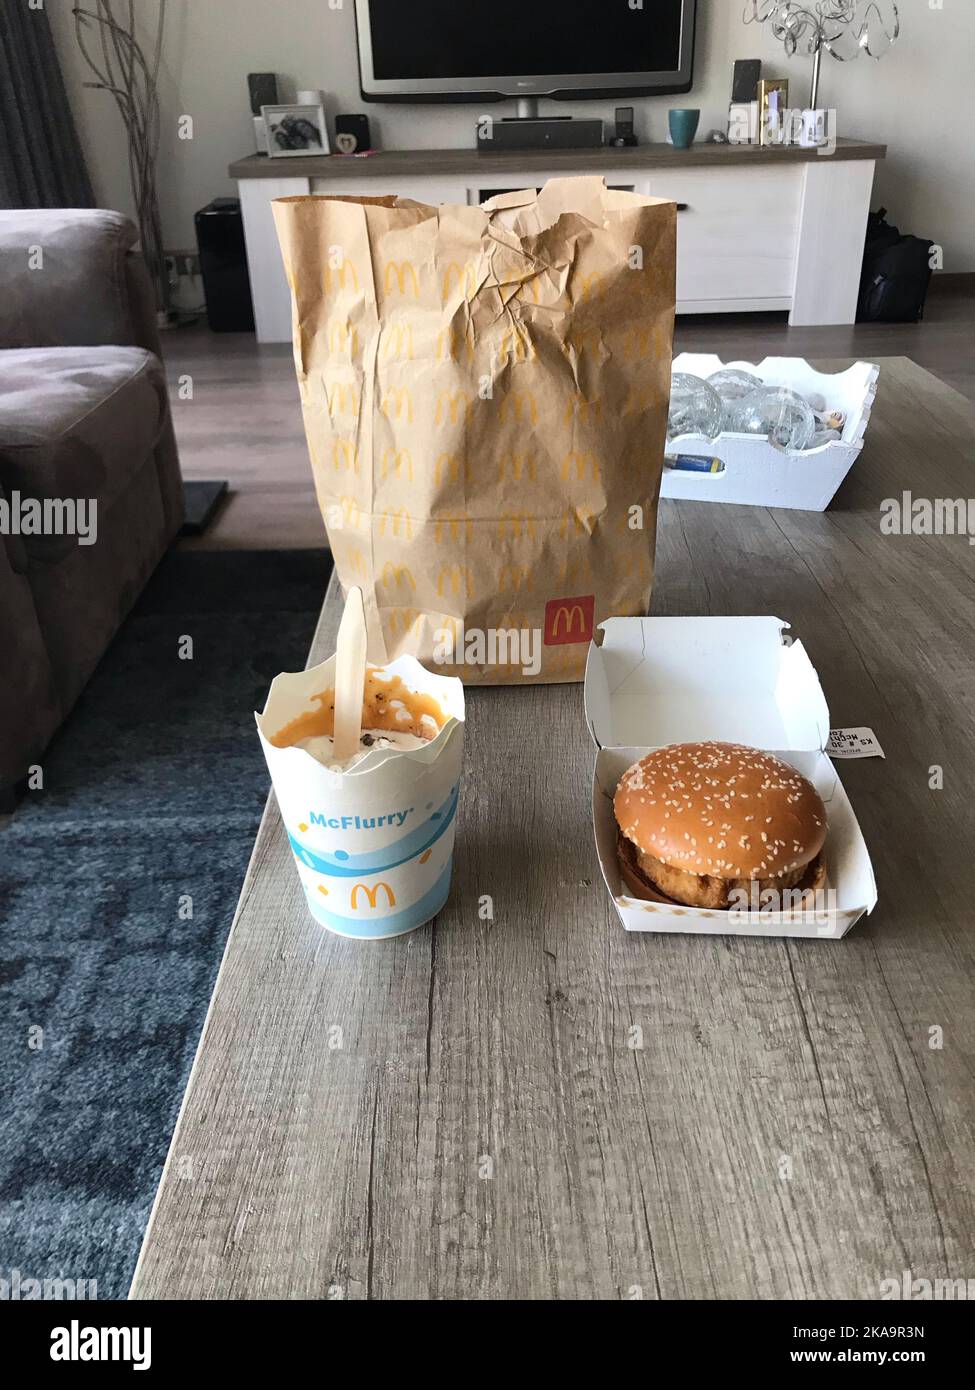 A delicious McFlurry ice-cream and McChicken burger on a wooden table at home Stock Photo